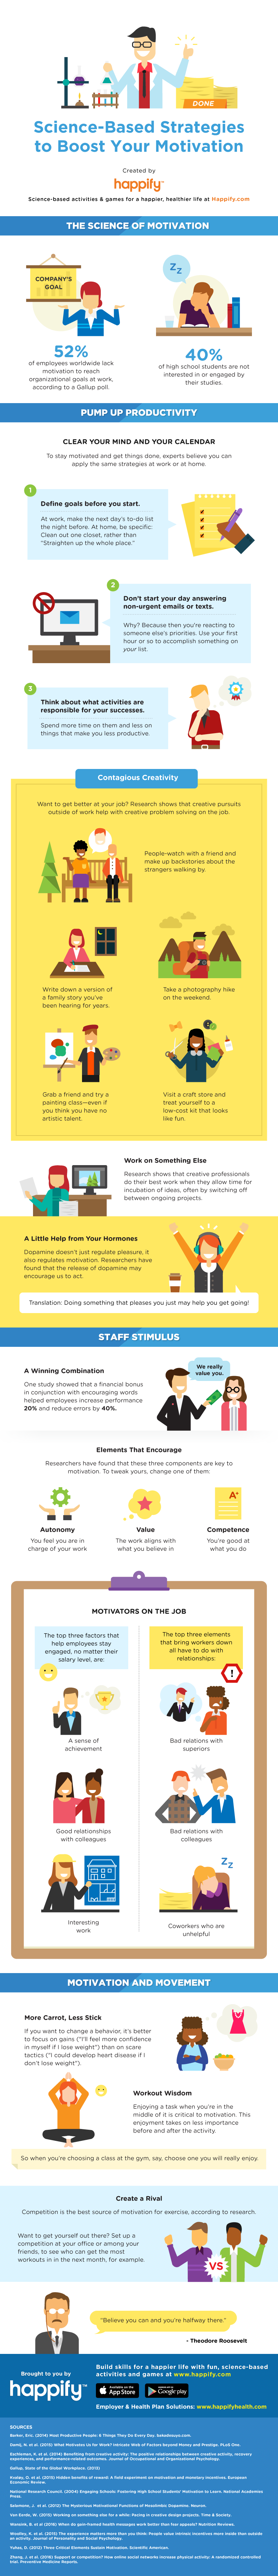 Science-Based Strategies To Boost Your Motivation - #infographic